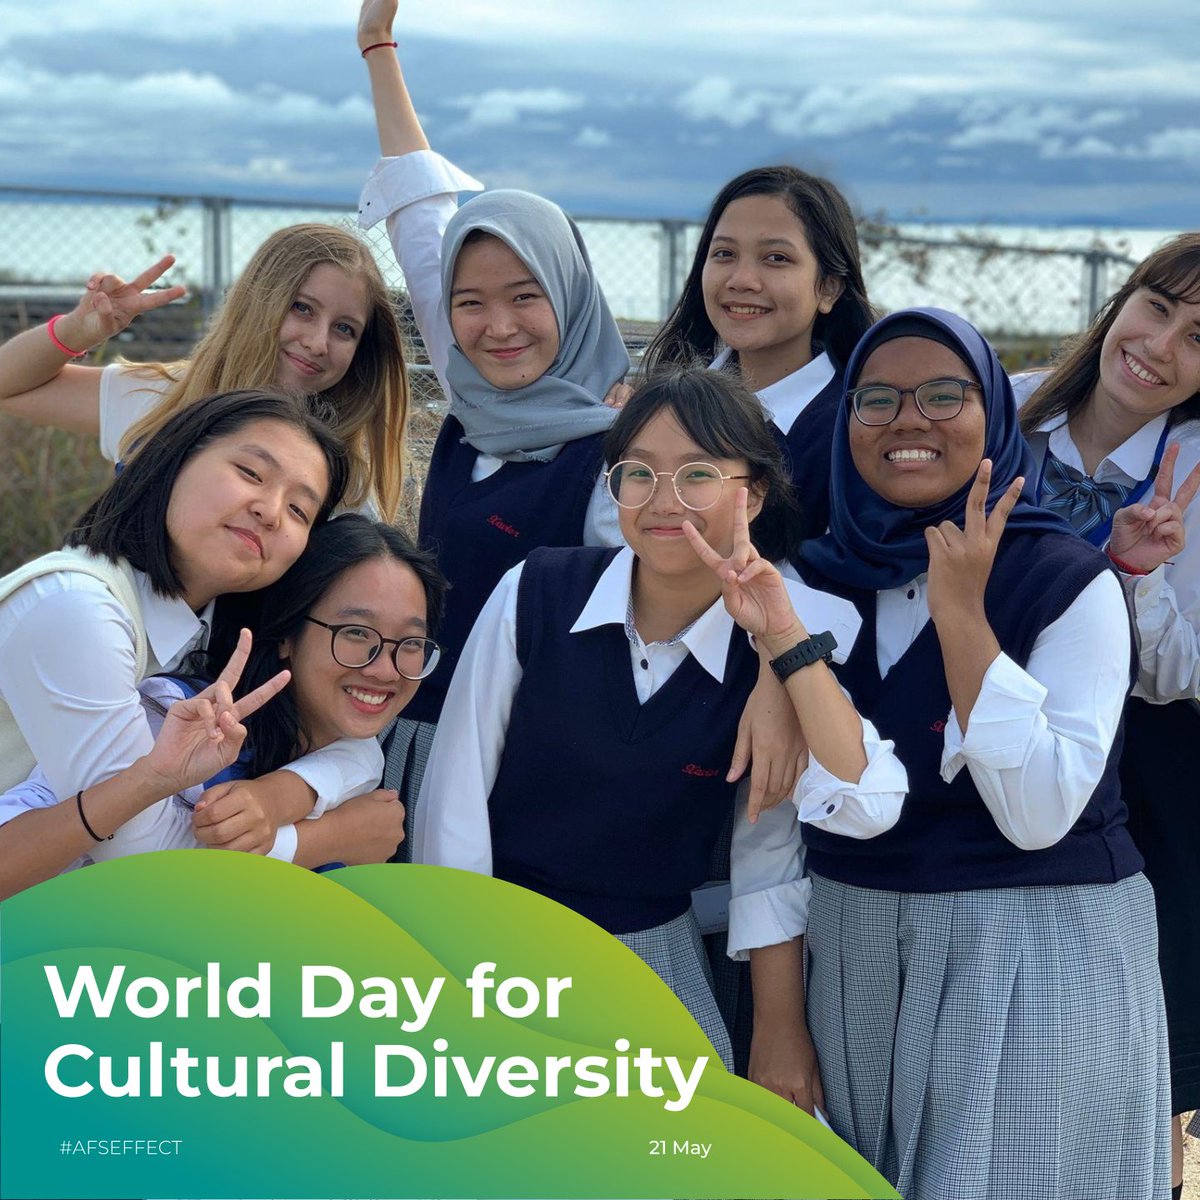 Every AFS exchange student, host family, volunteer and staff member contributes to building a more diverse and inclusive world. Join them! On Word Day for Cultural Diversity, do one thing for intercultural dialogue by joining local AFS activities.
#AFSeffect #culturaldiversityday